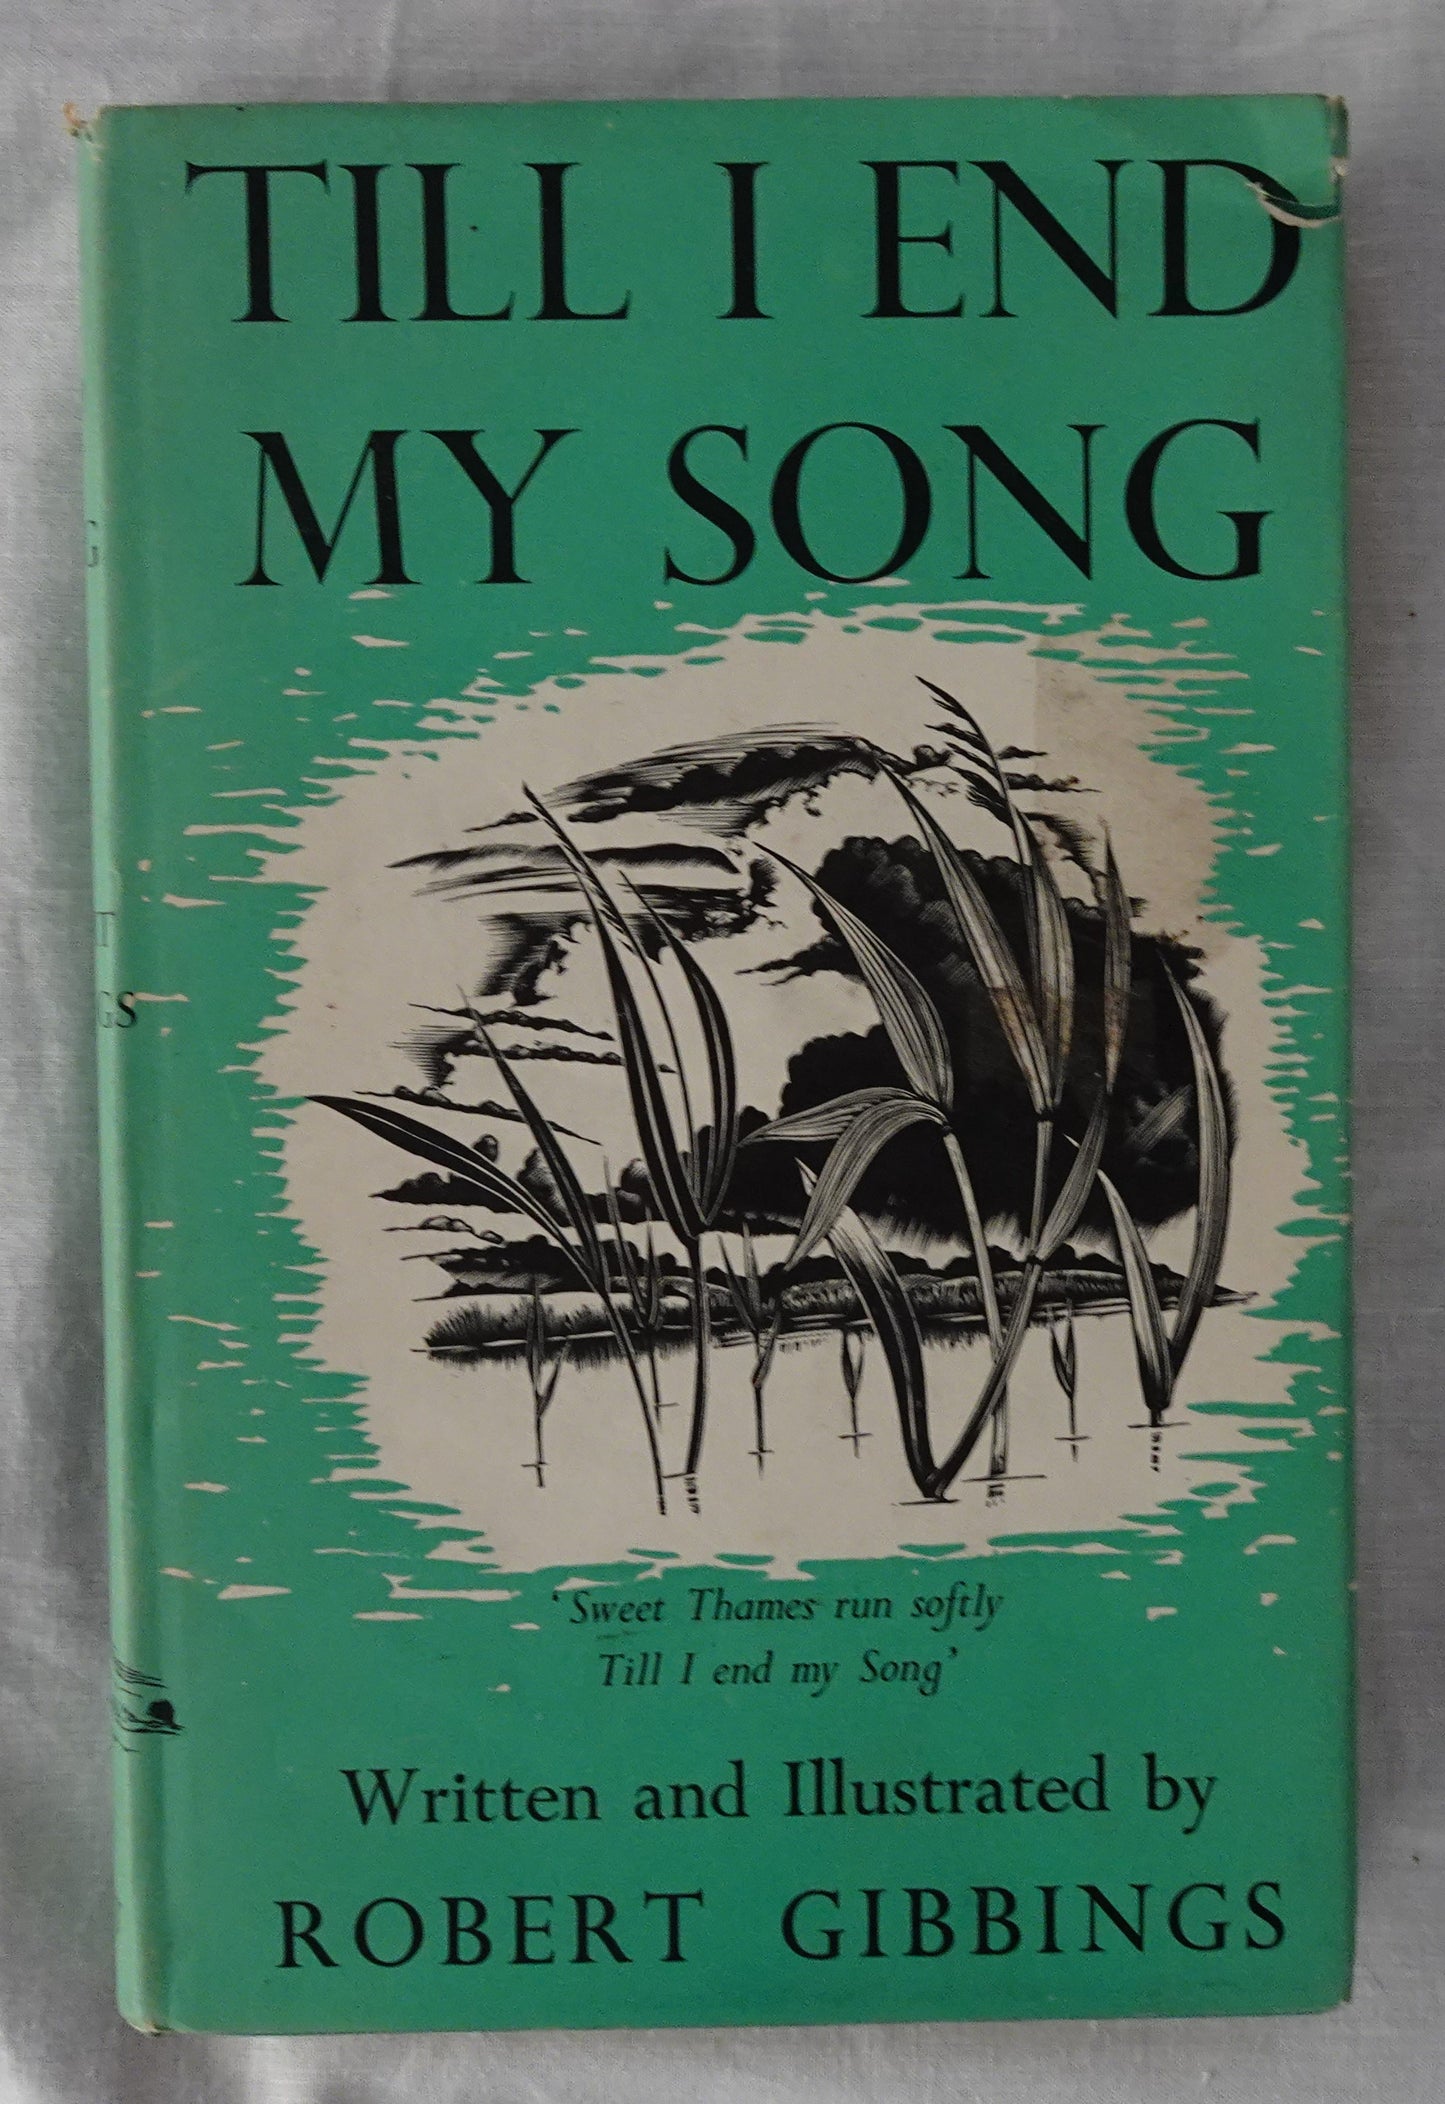 Till I End My Song  by Robert Gibbings  With wood engravings by the author